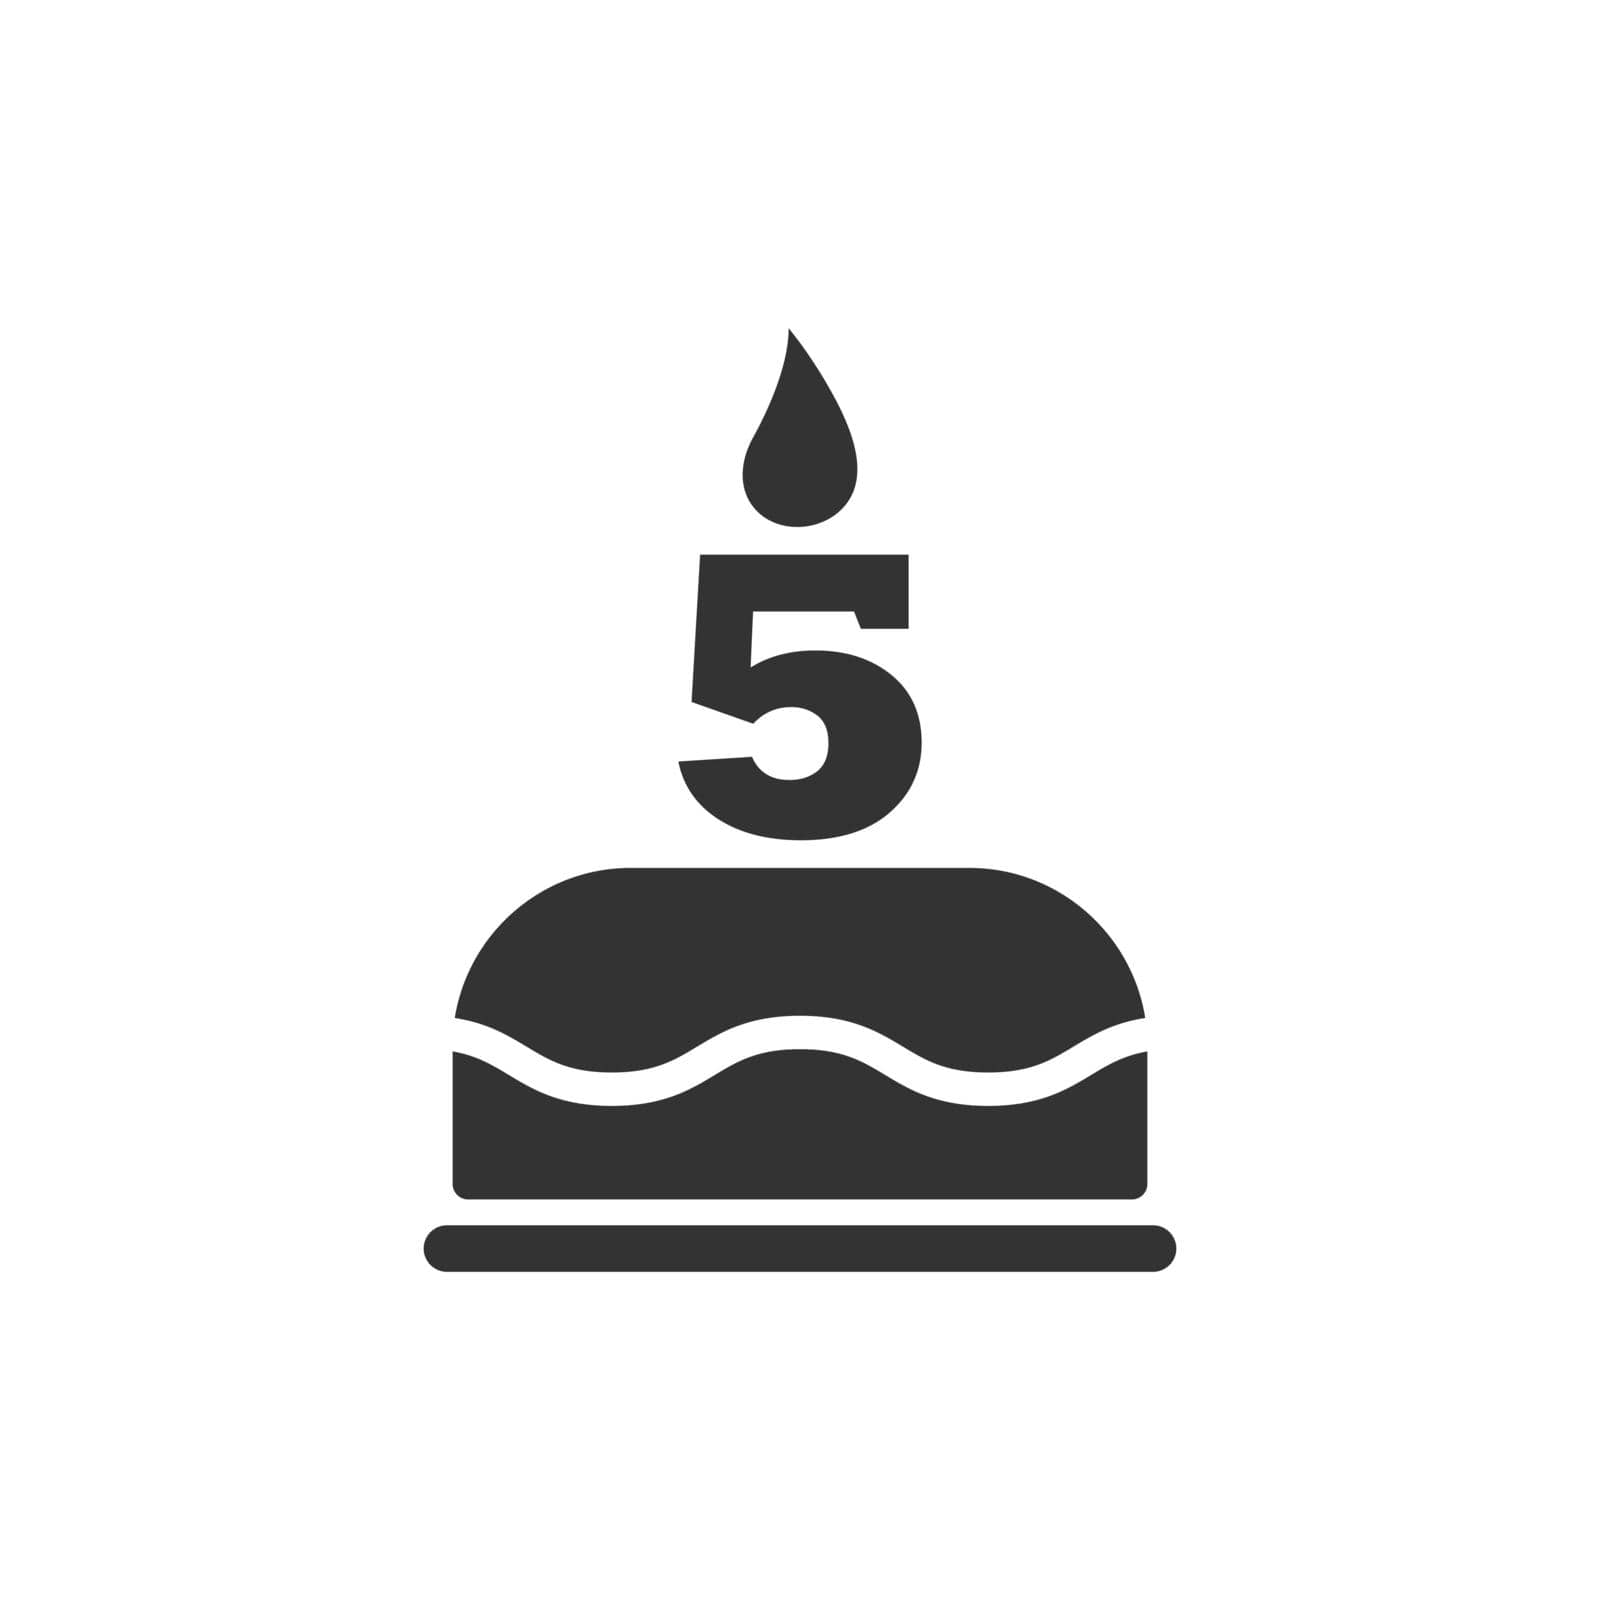 Happy fifth birthday icon. Cake with a candle in the form of the number 5. Vector symbol